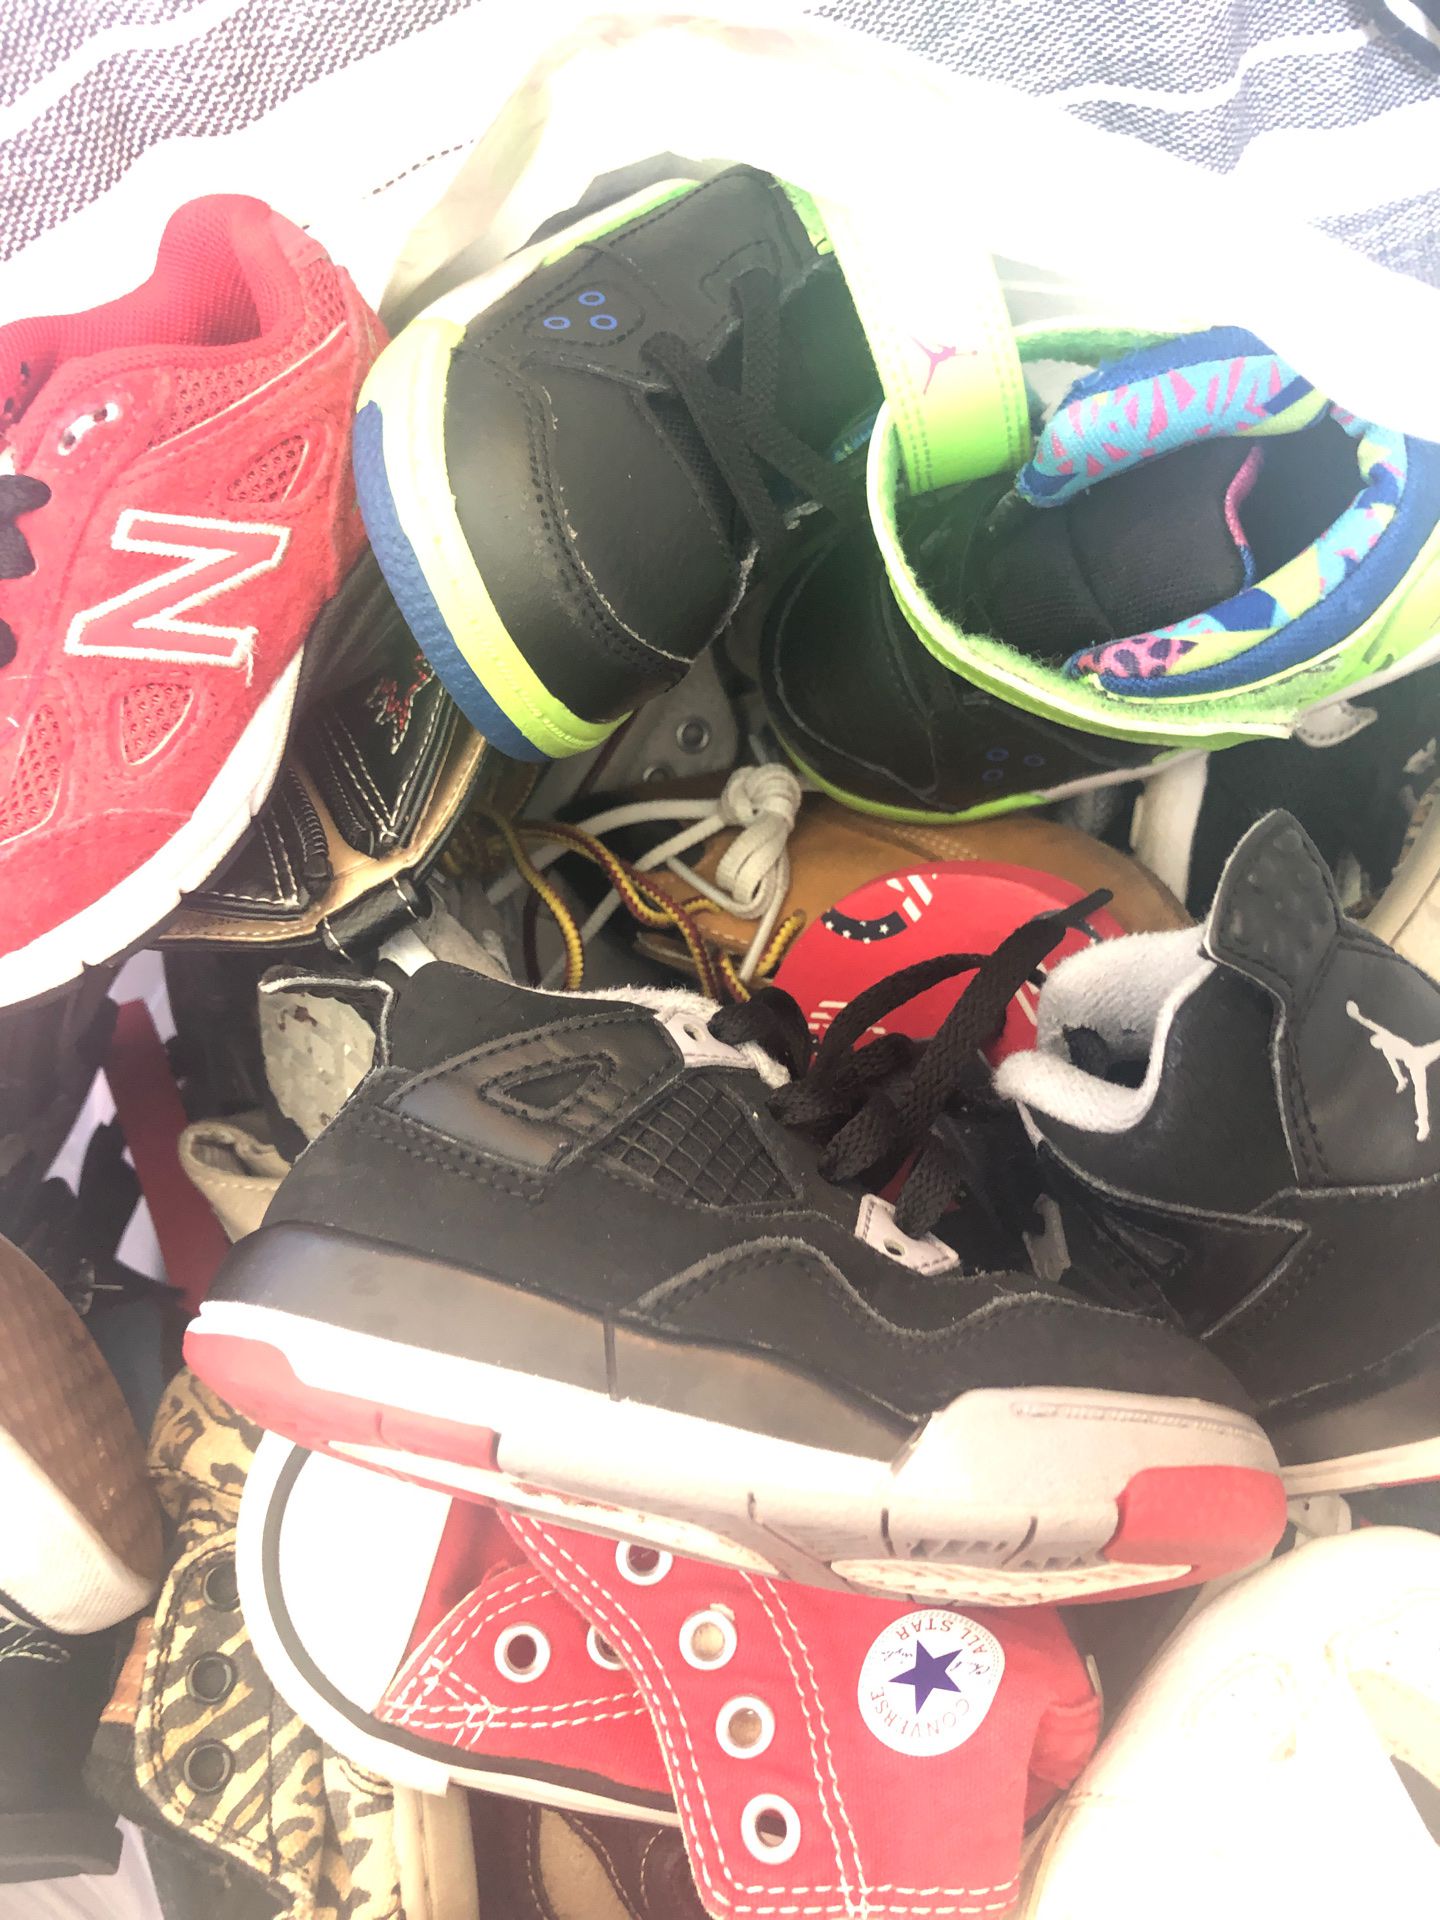 60 pairs of toddler shoes